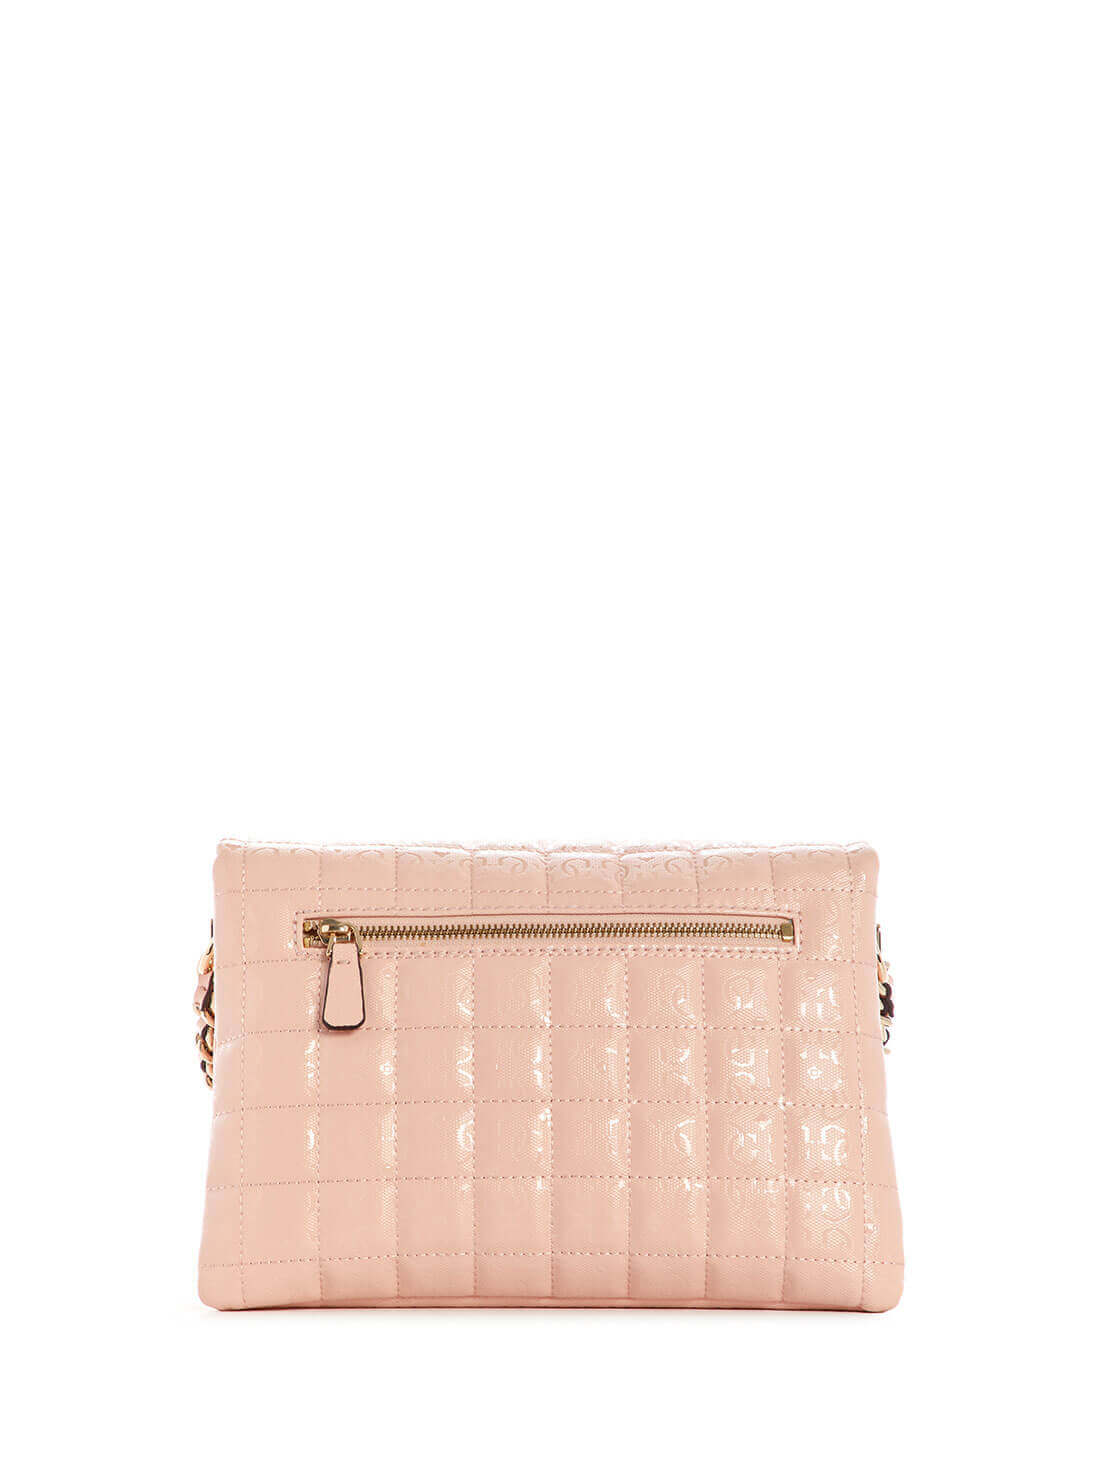 Guess bag in light pink with embossing